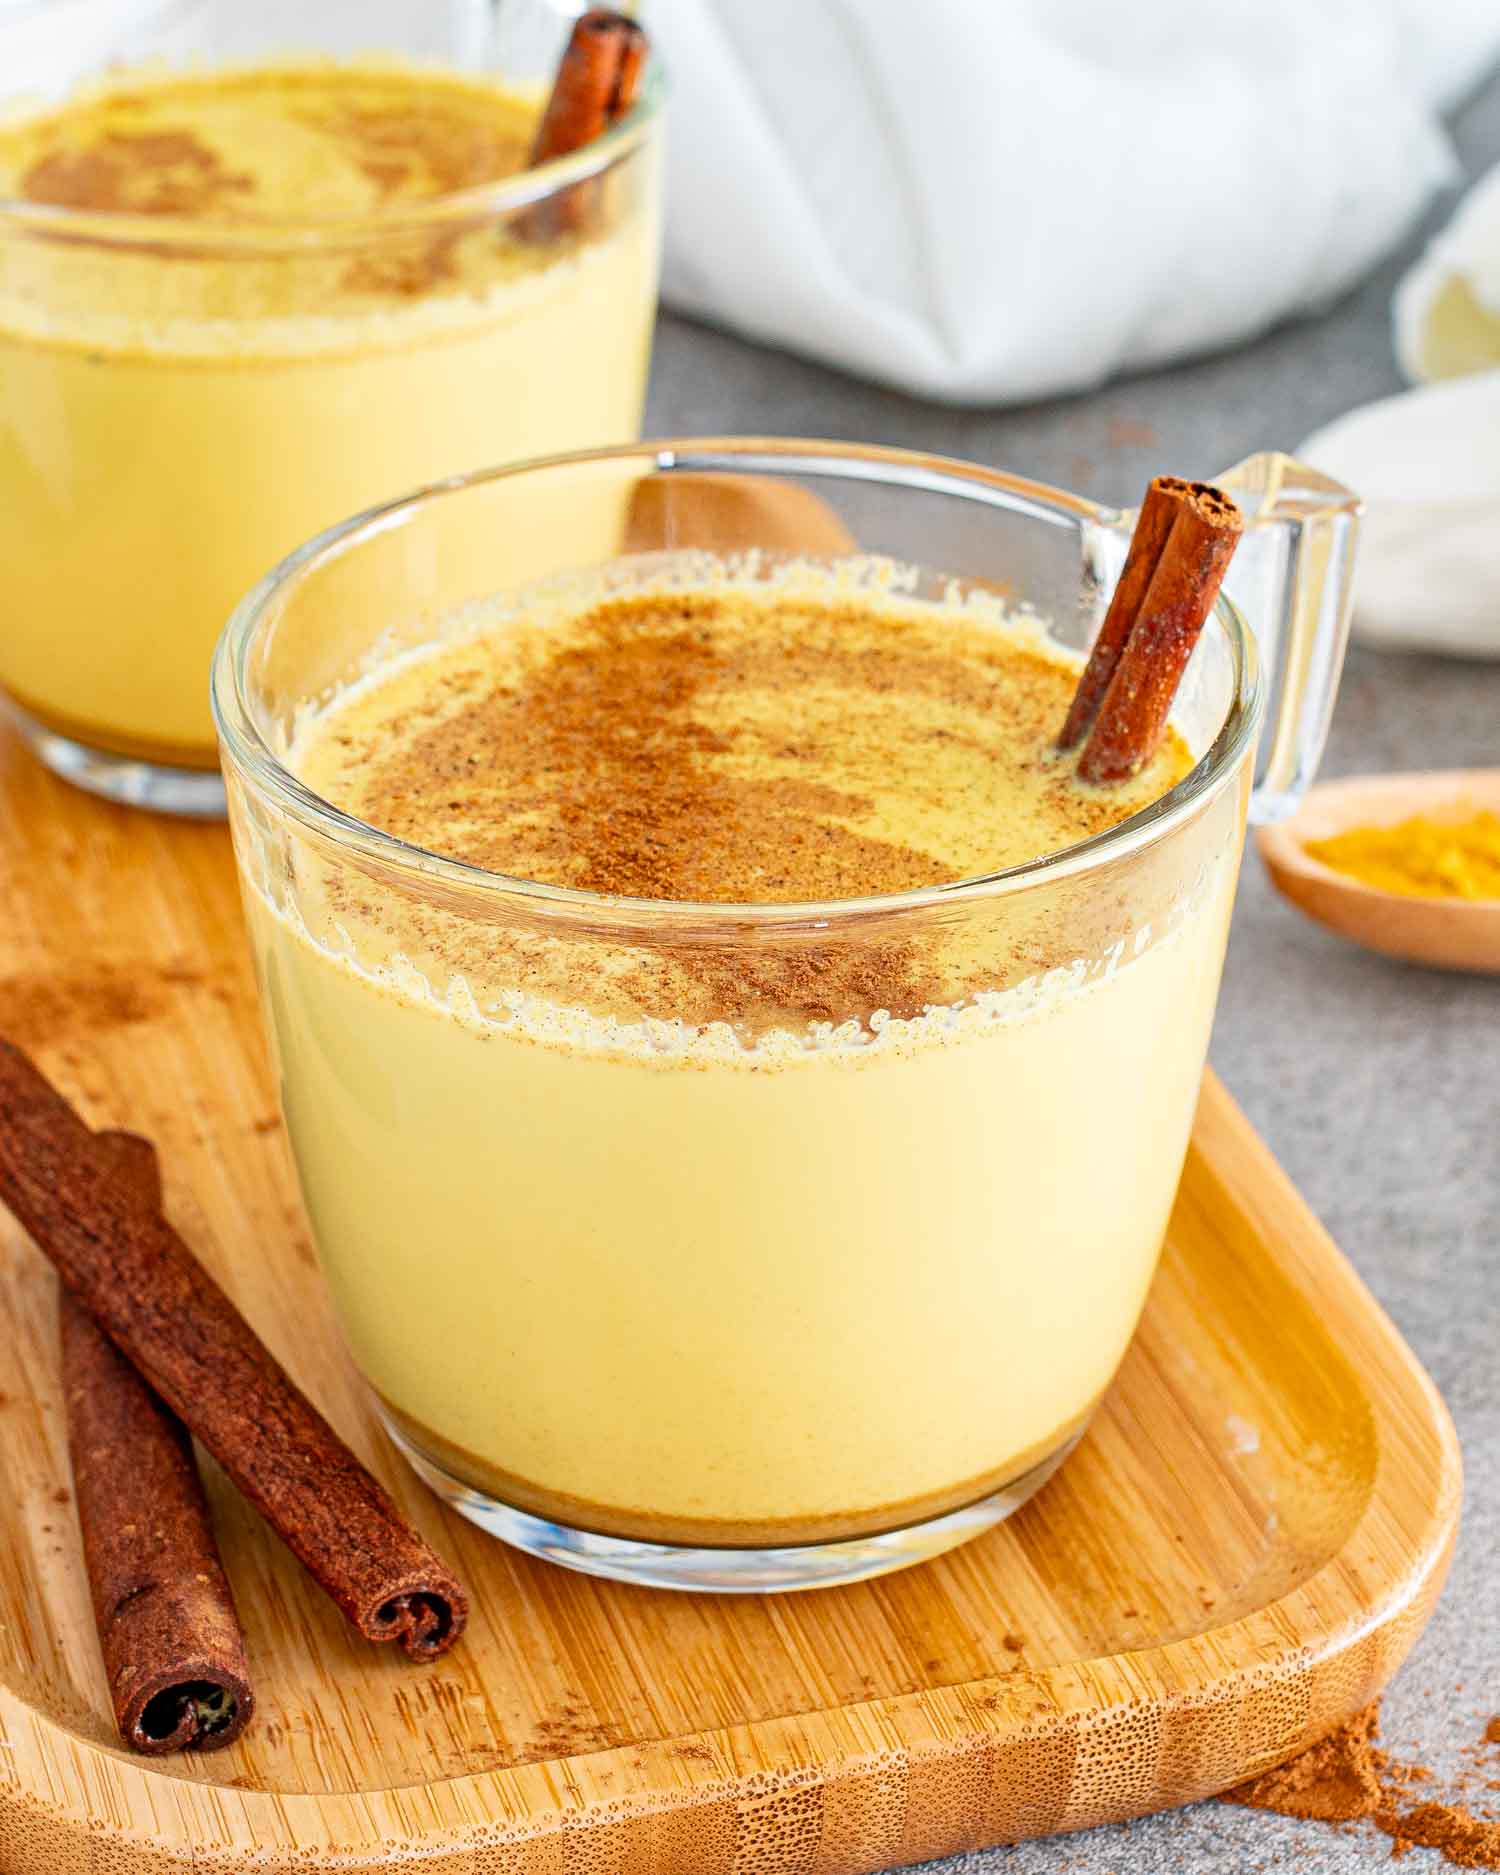 A warm turmeric latte garnished with a dusting of cinnamon and a whole cinnamon stick.